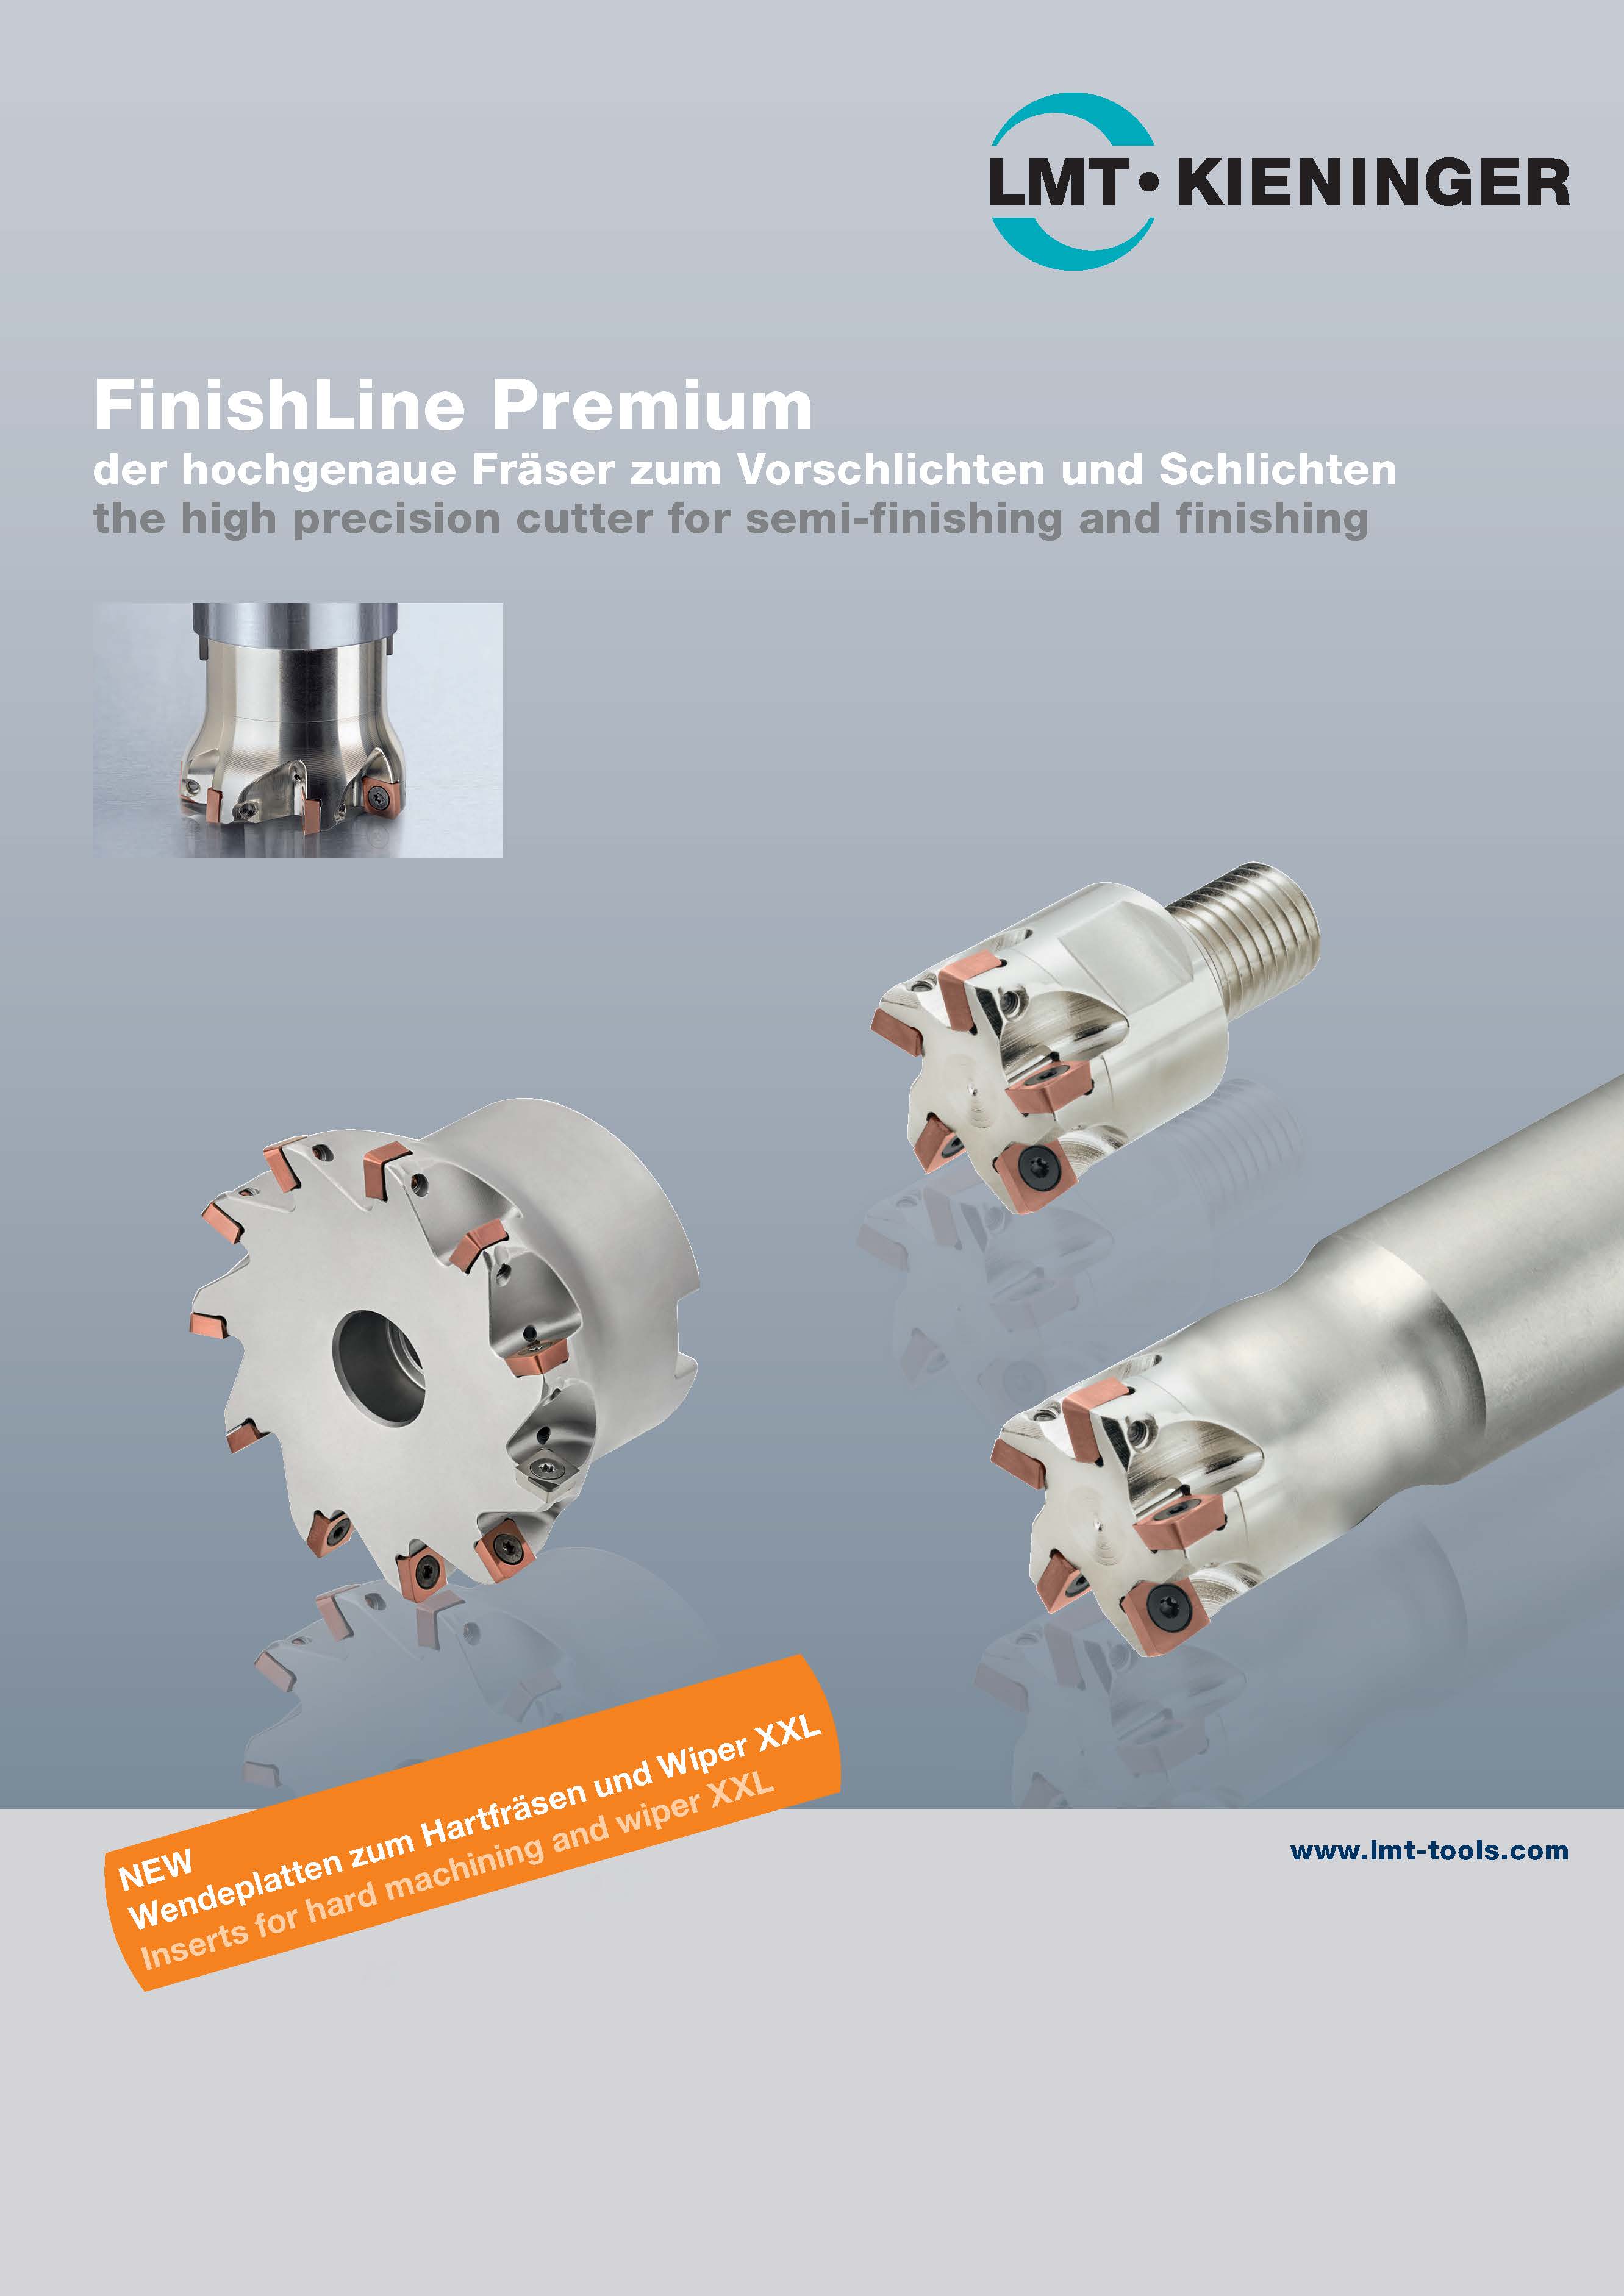 FinishLine Premium: the high precision cutter for semi-finishing and finishing